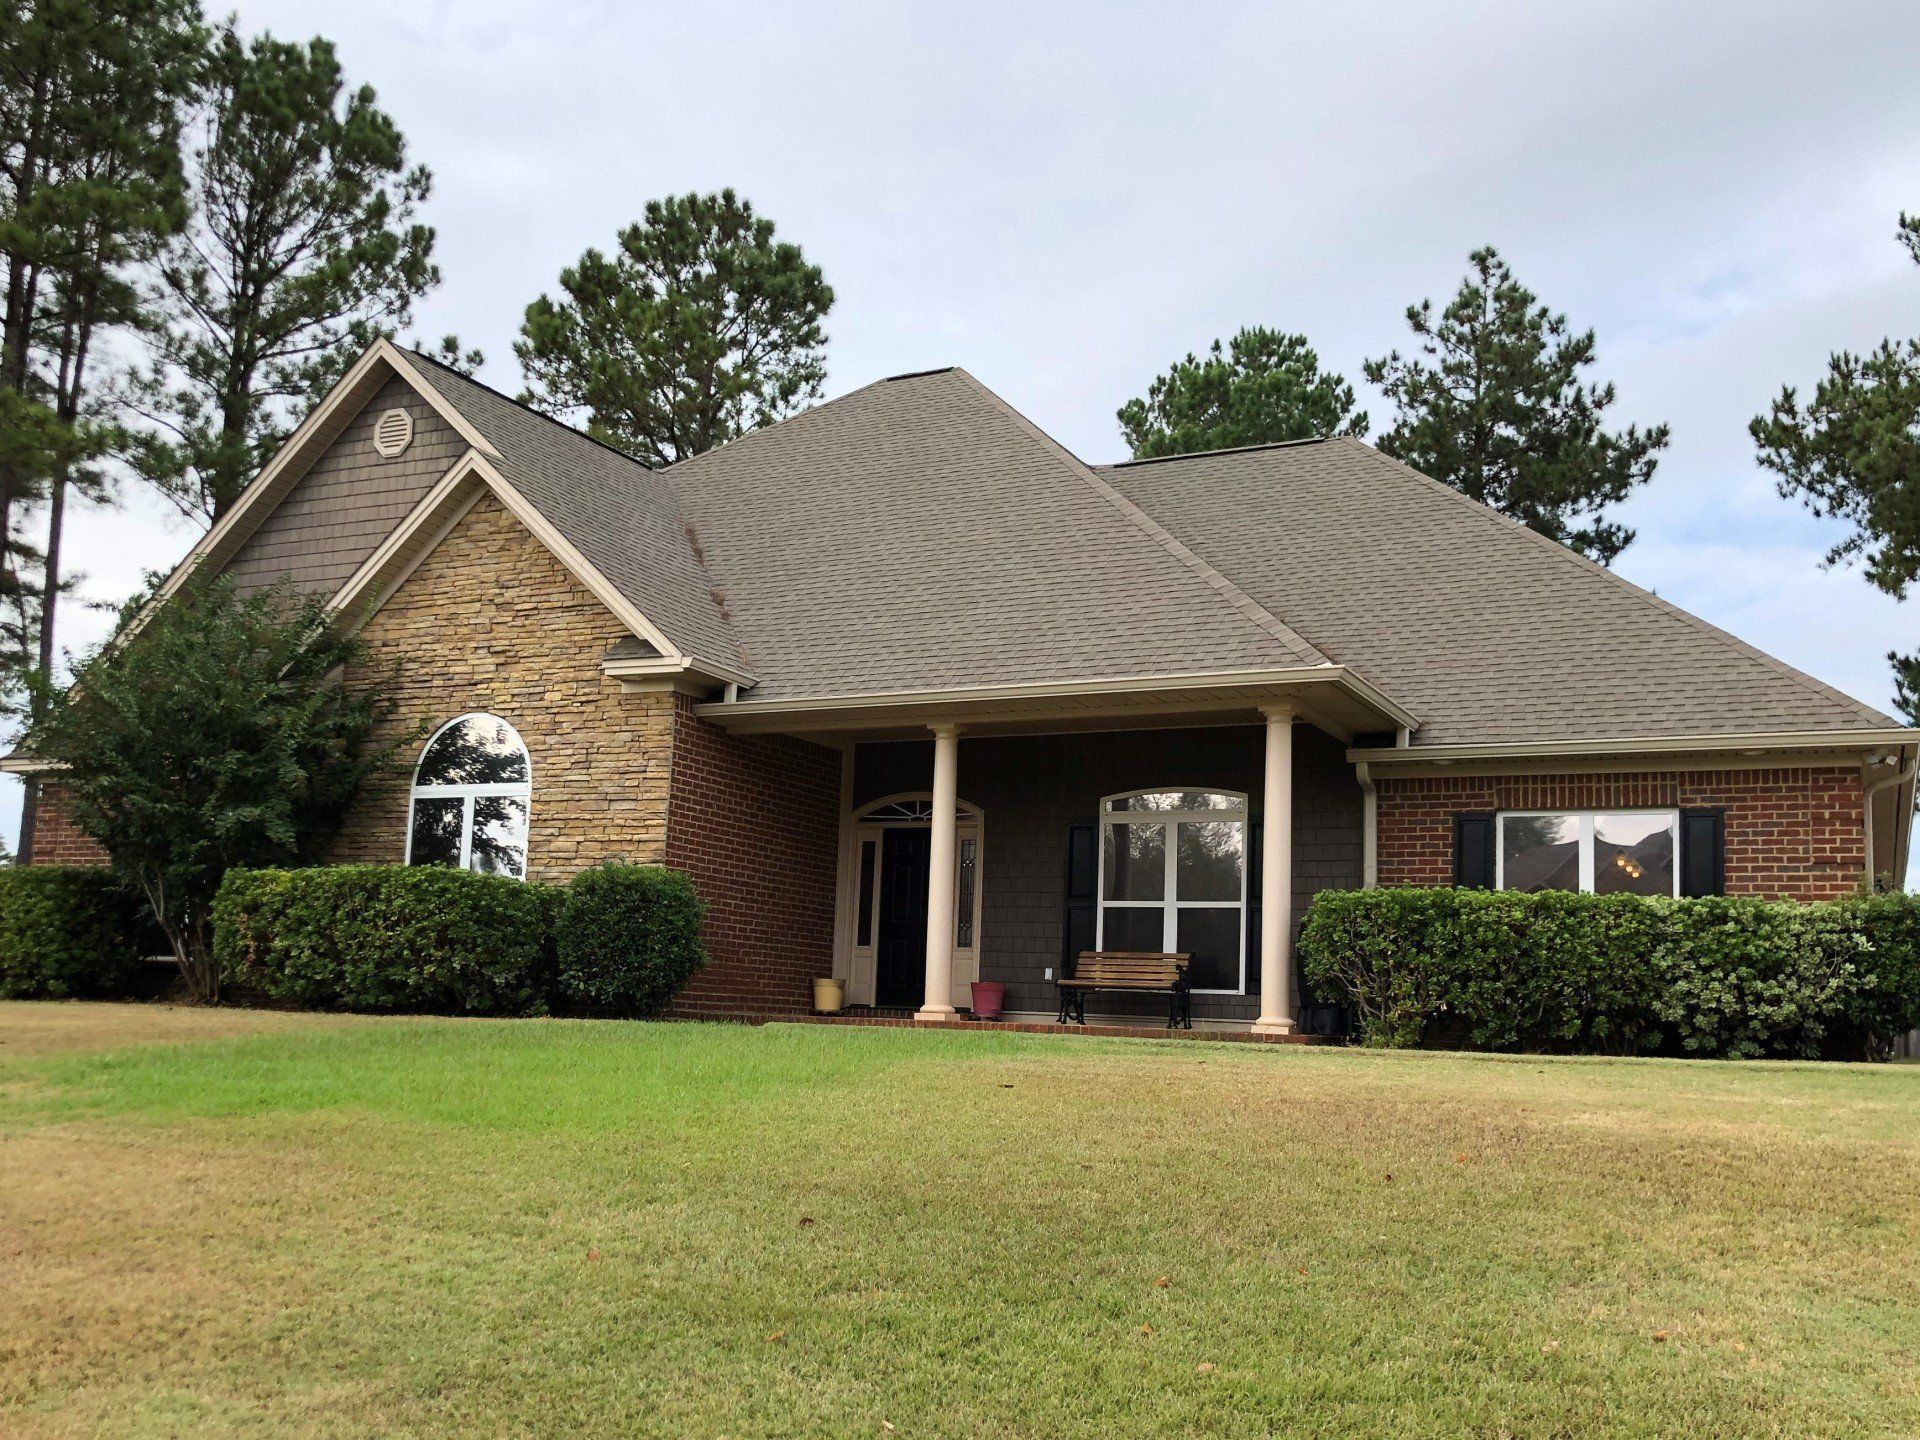 Best residential window efficiency in Wetumpka AL - Leading-performance power-saving SPF window treatment also eliminates bright UV Sun Glare from this Wetumpka home.